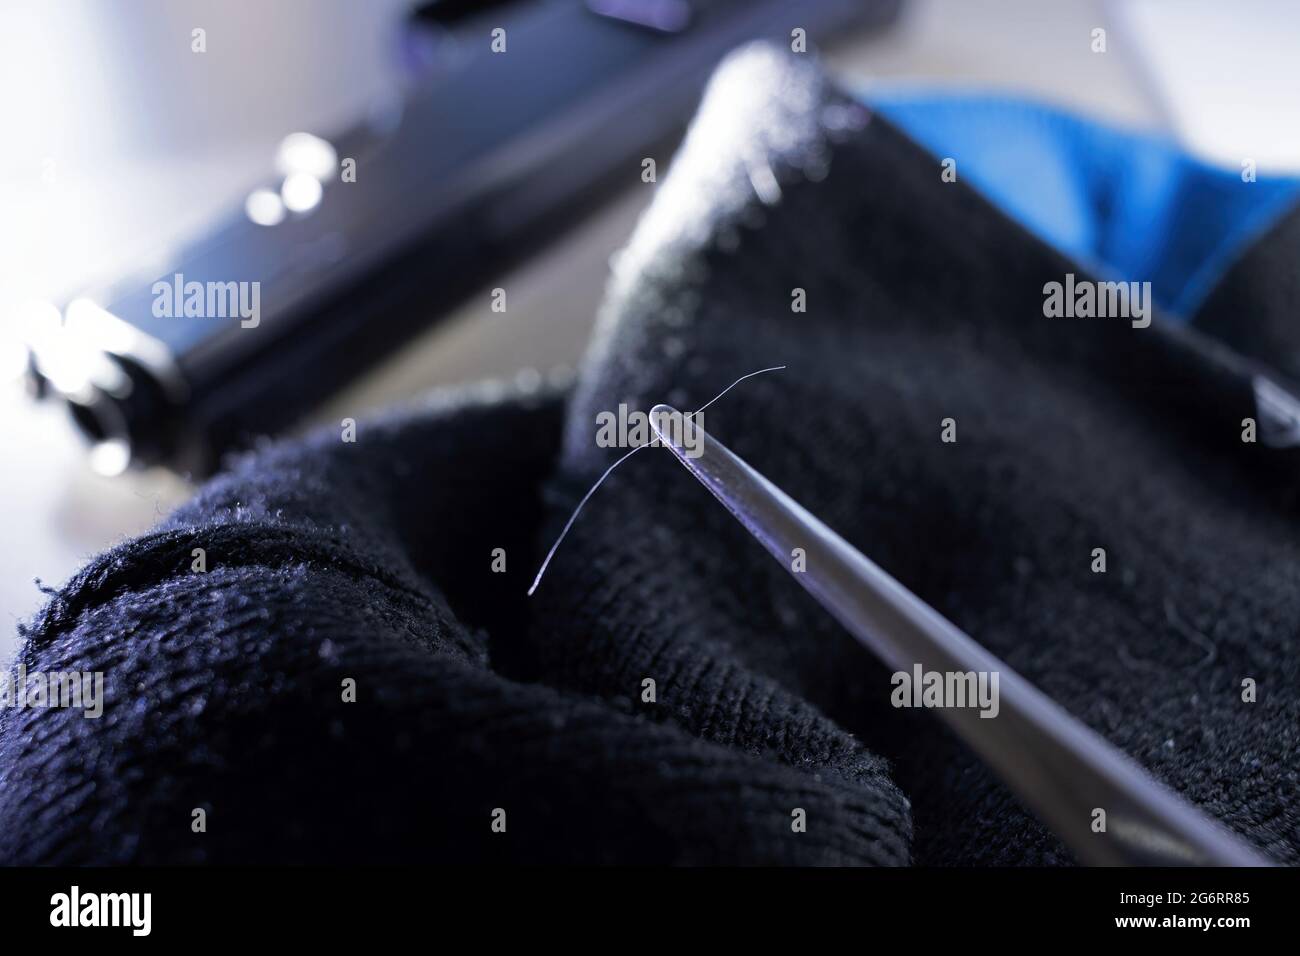 CSI police officer collects human hair samples from a tissue, police investigation concept Stock Photo